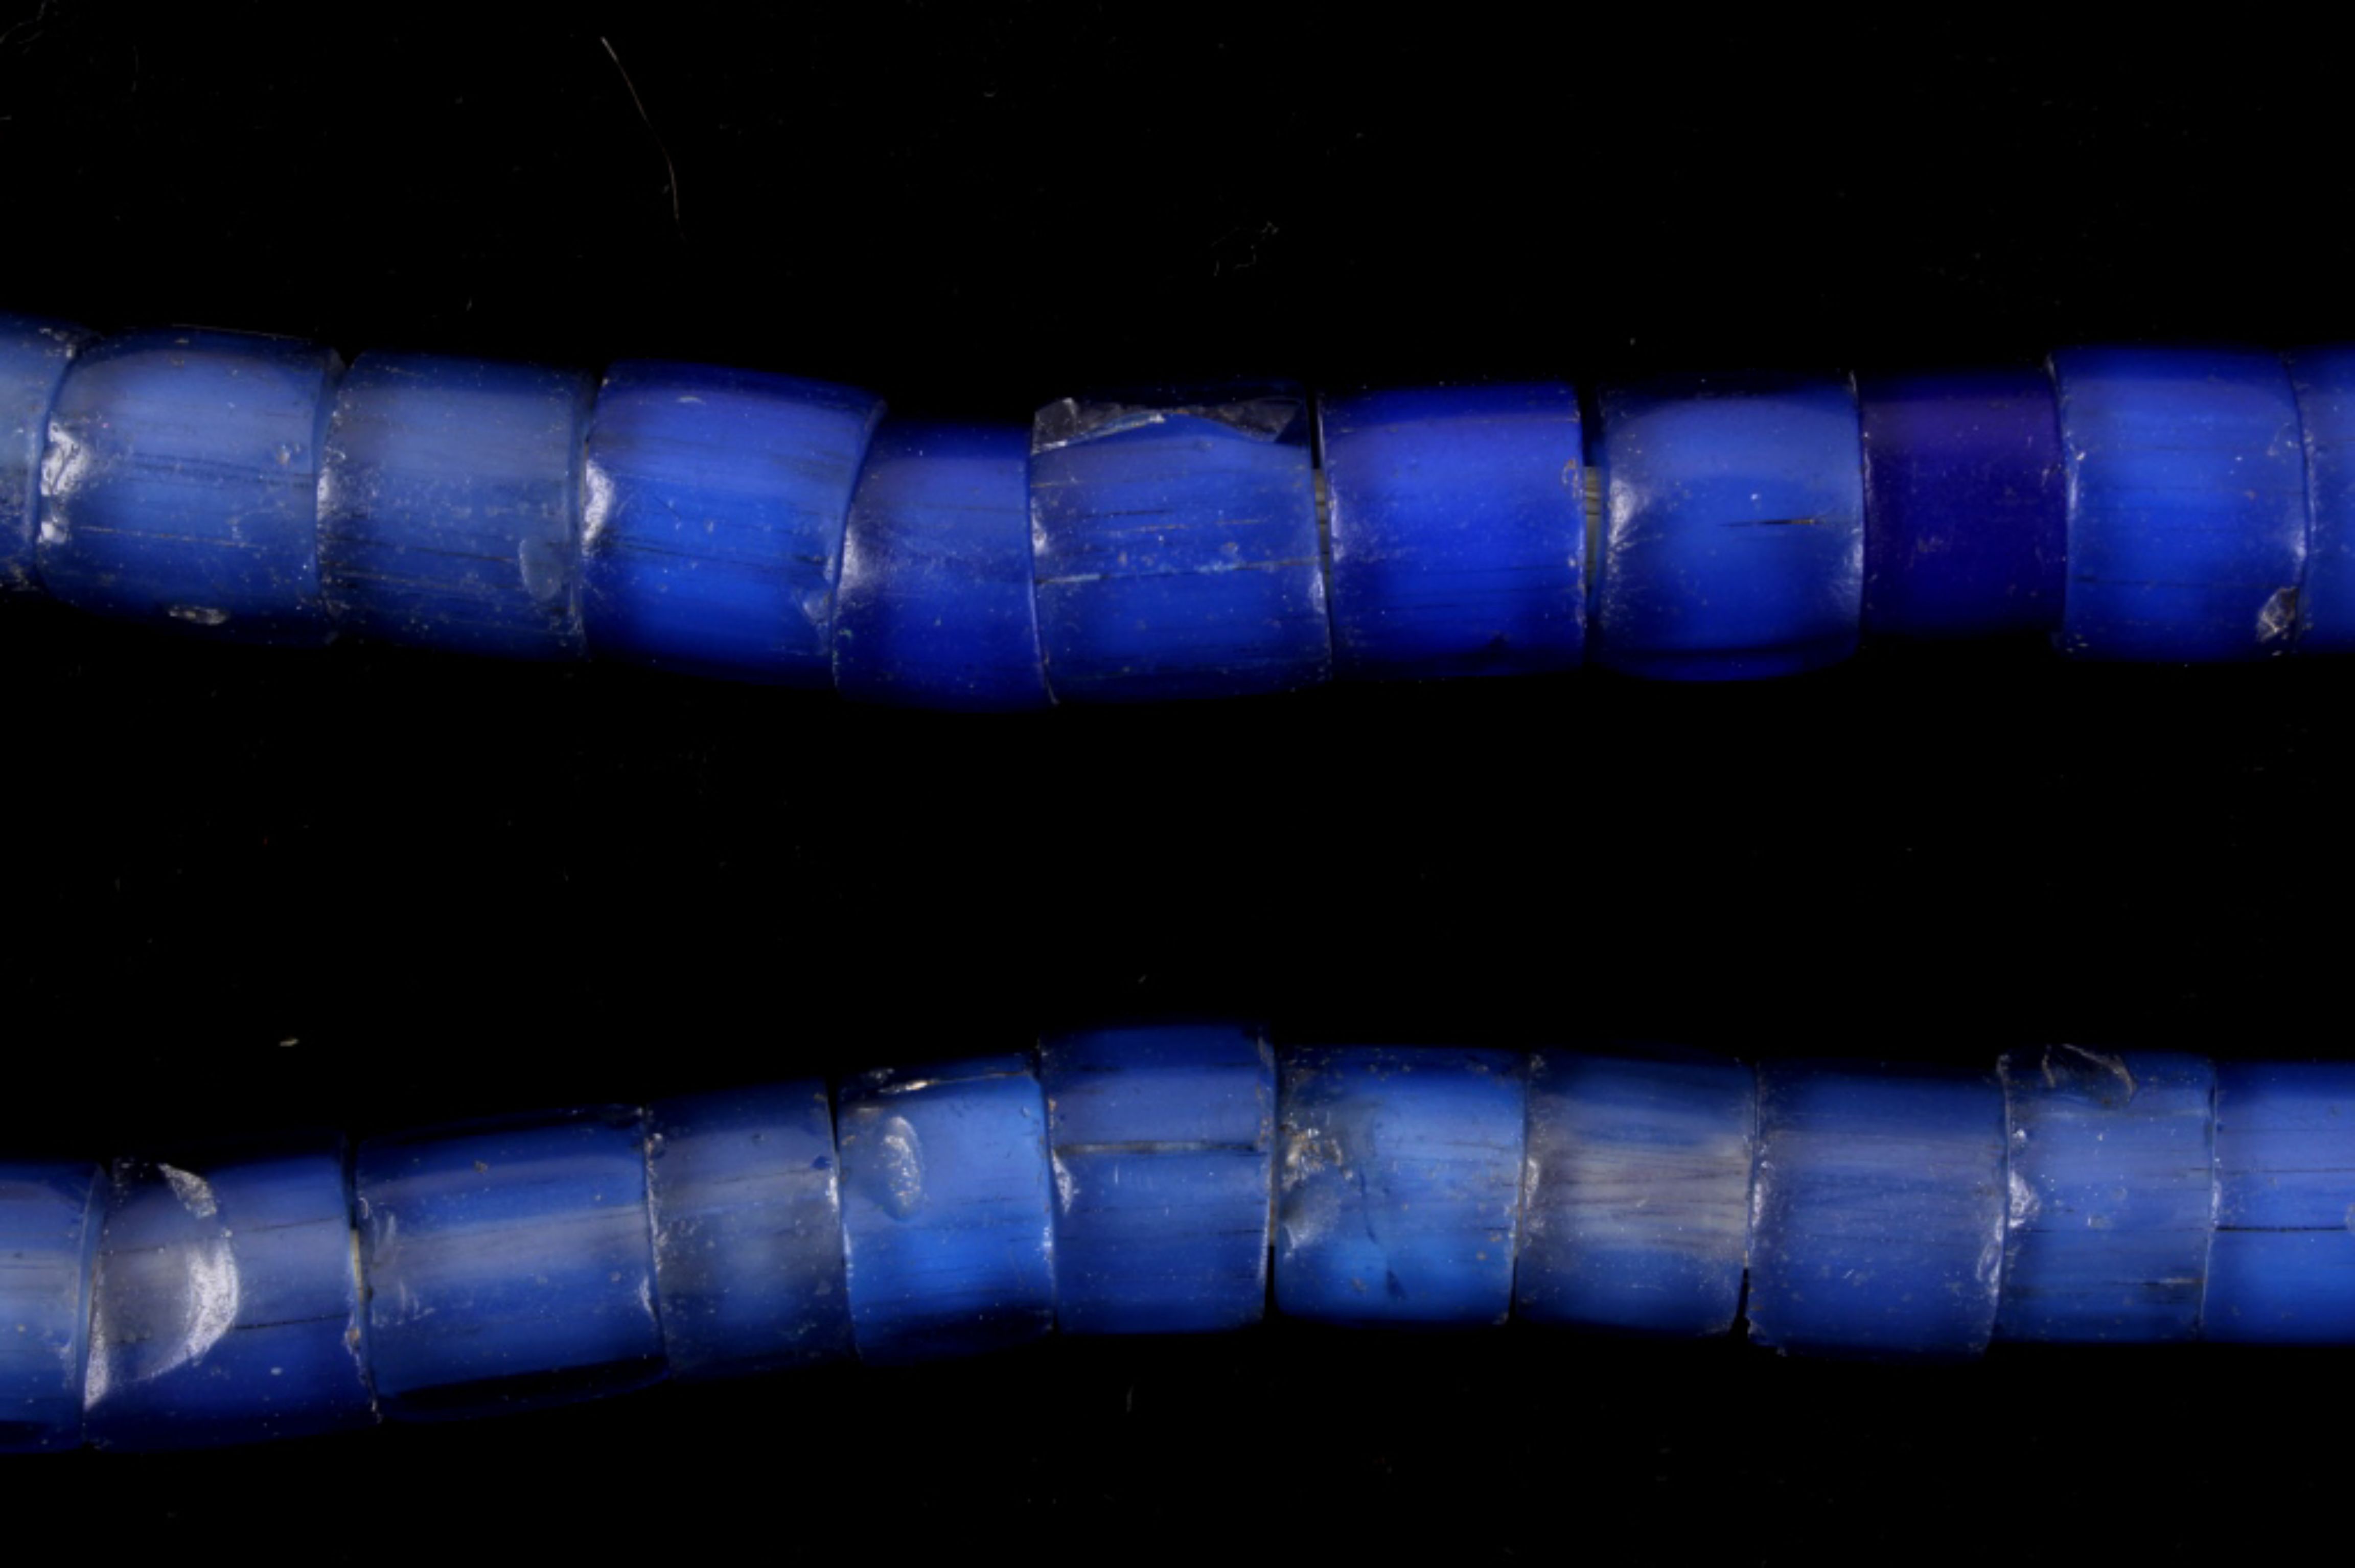 African Cobalt Glass Trade Bead Necklaces - Image 6 of 17